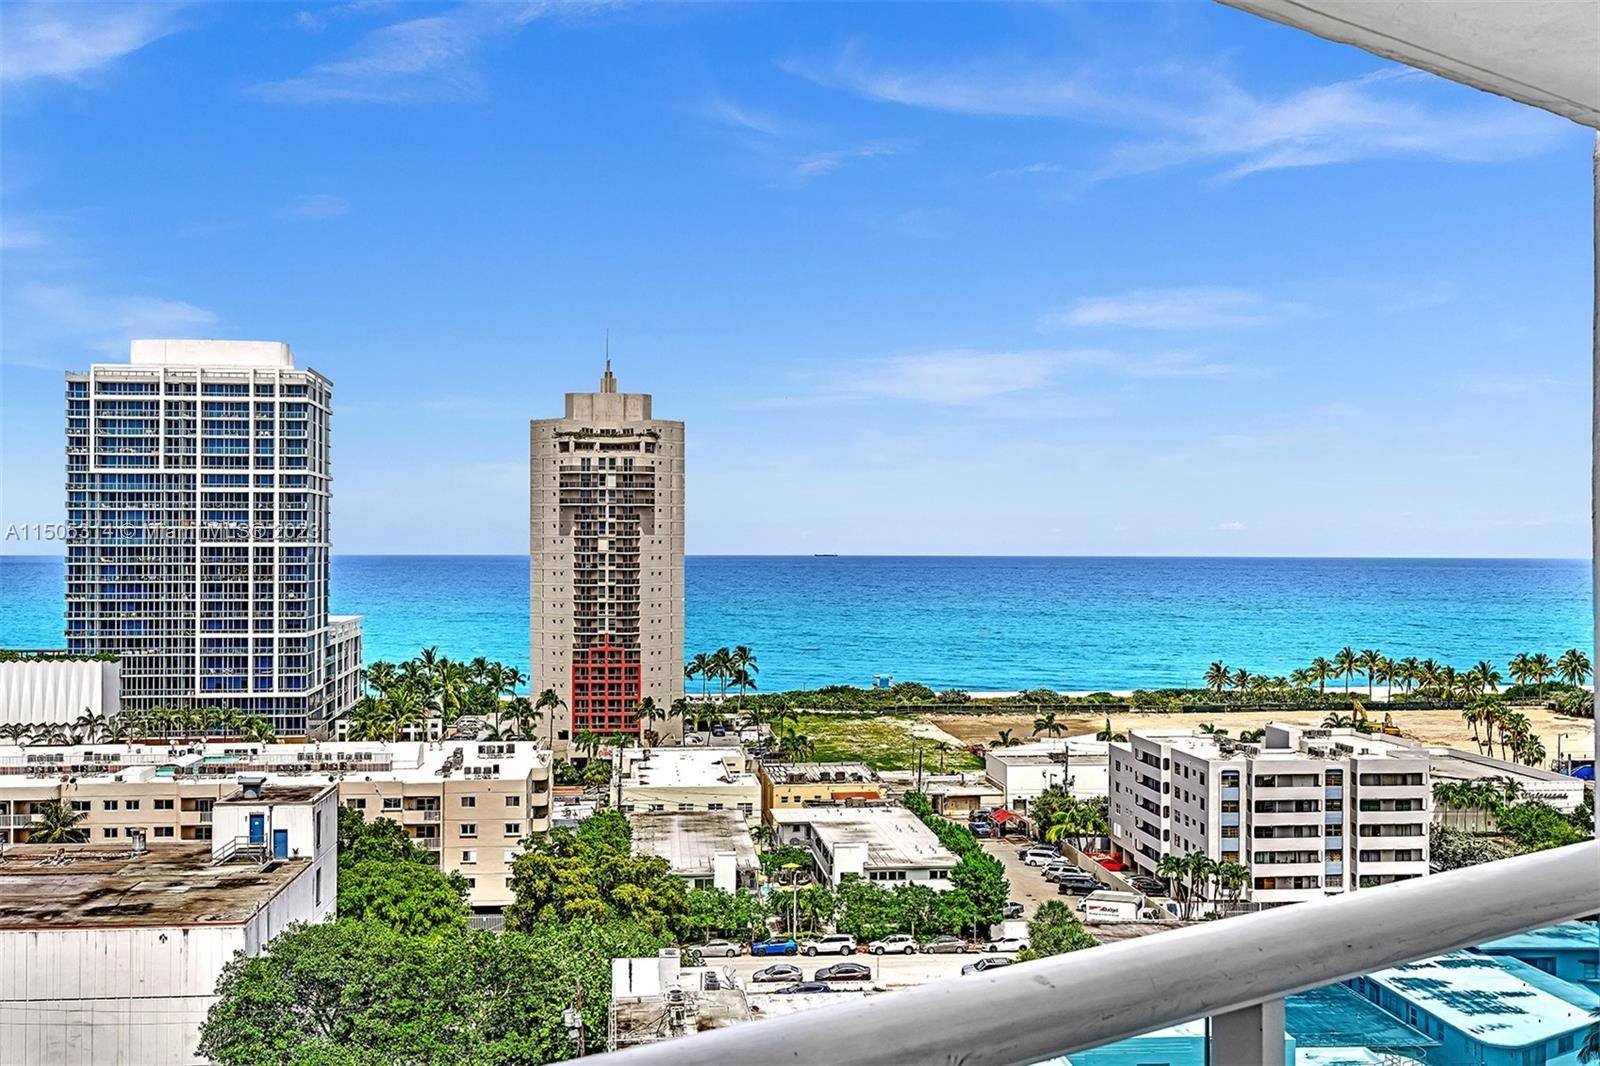 Introducing this newly updated 2 Bedroom 15th floor corner unit w gorgeous ocean views.